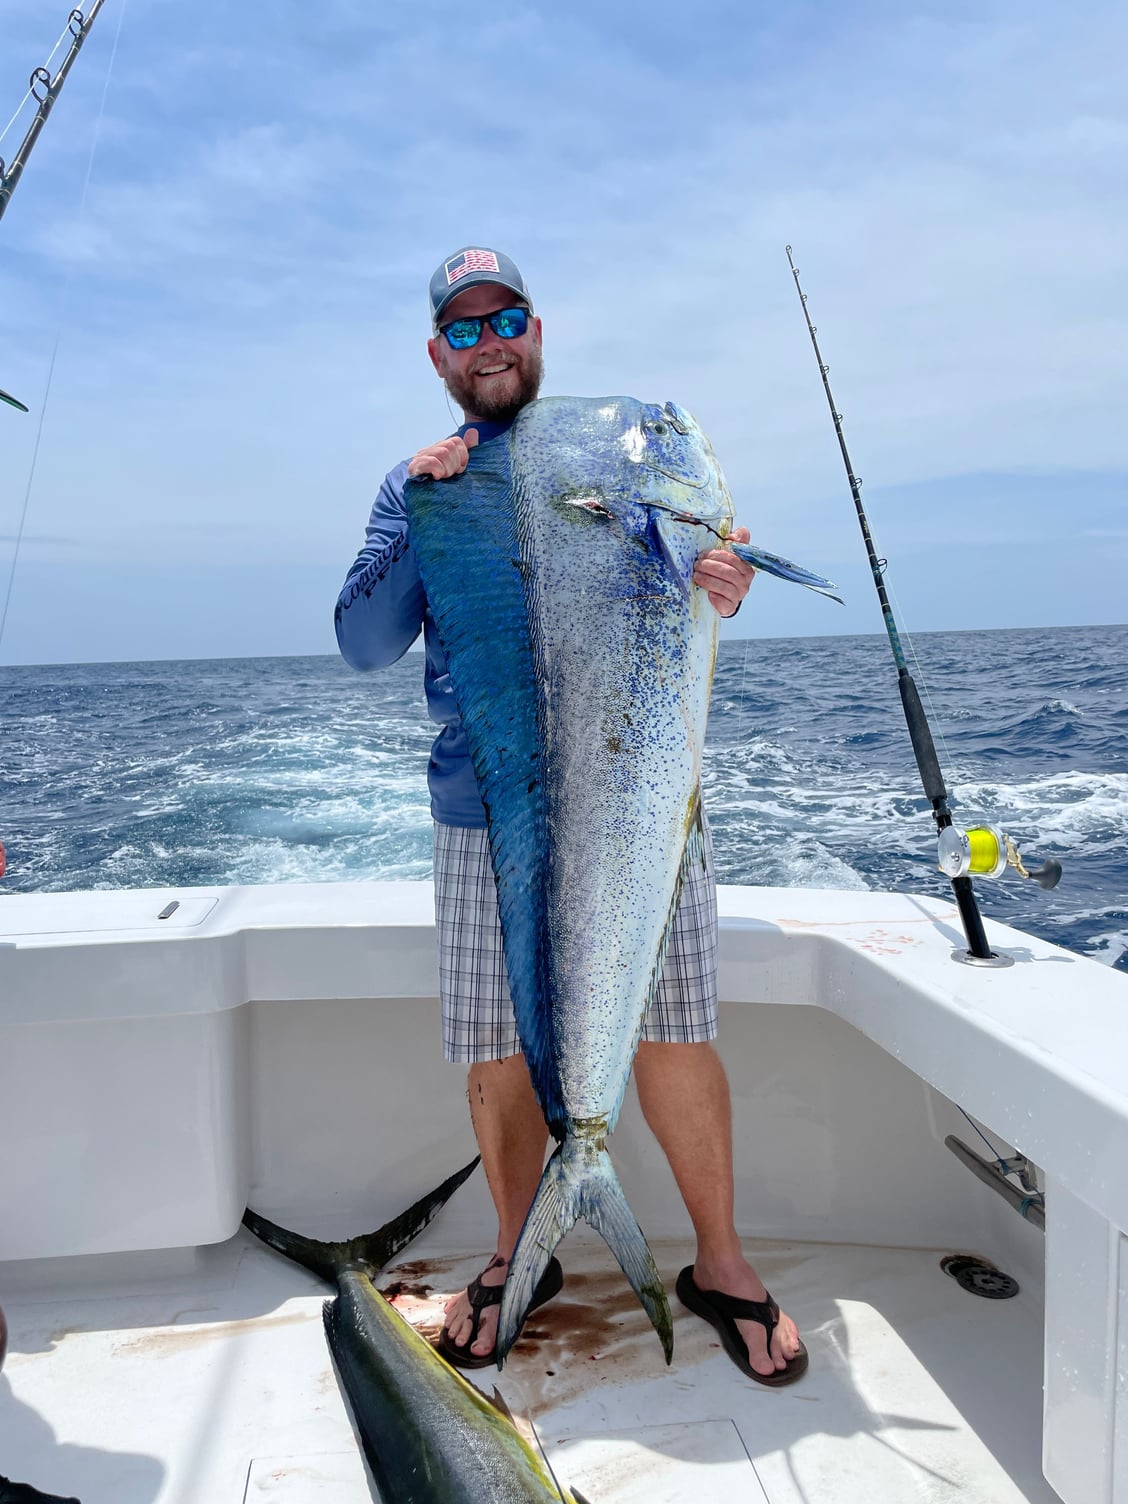 Mahi weight guesses? - The Hull Truth - Boating and Fishing Forum